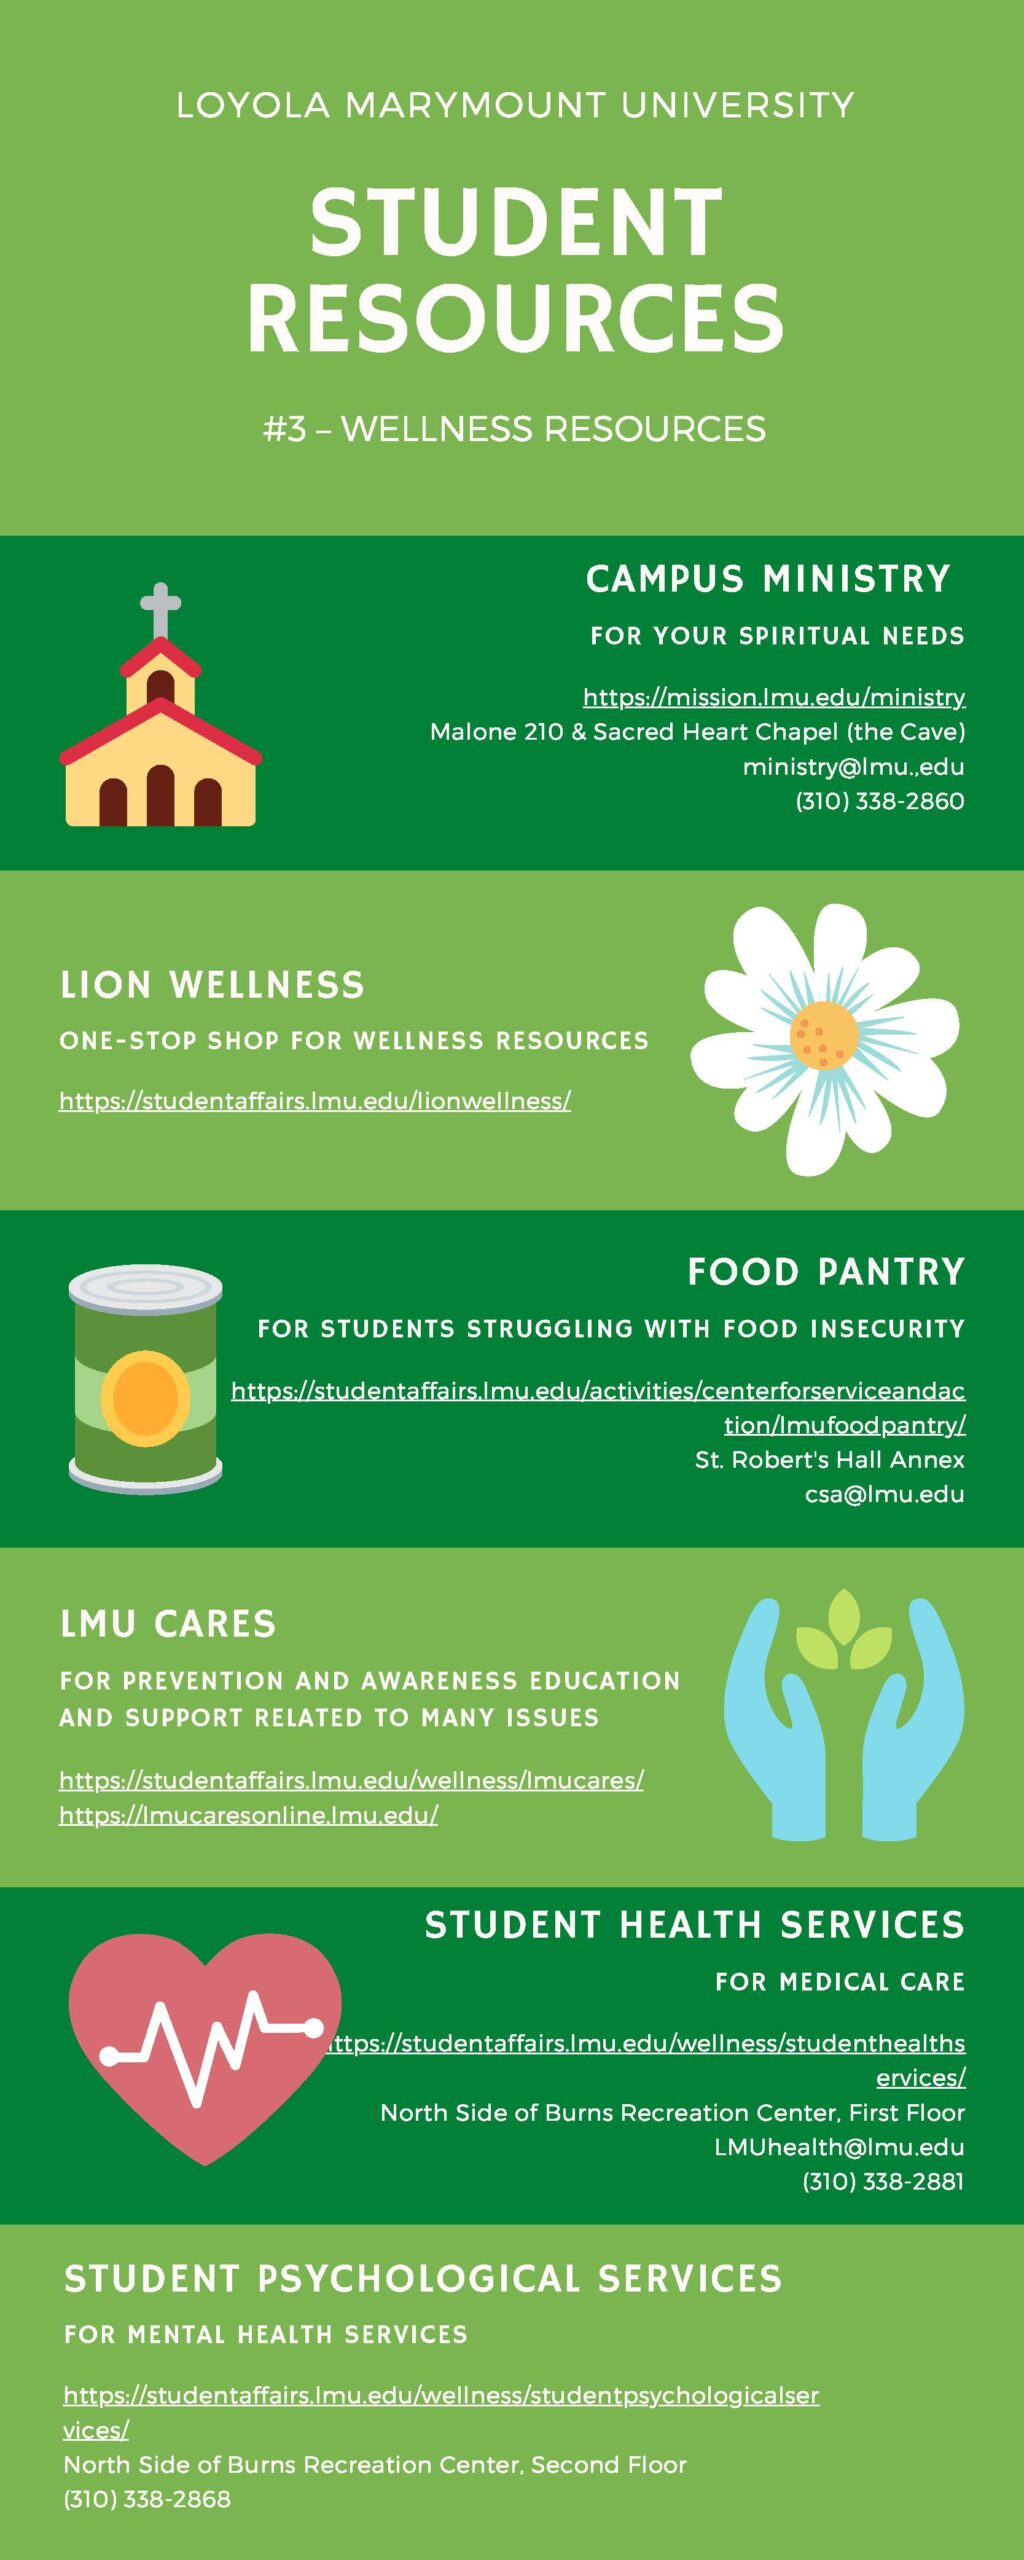 Infographic for wellness resources on the LMU campus